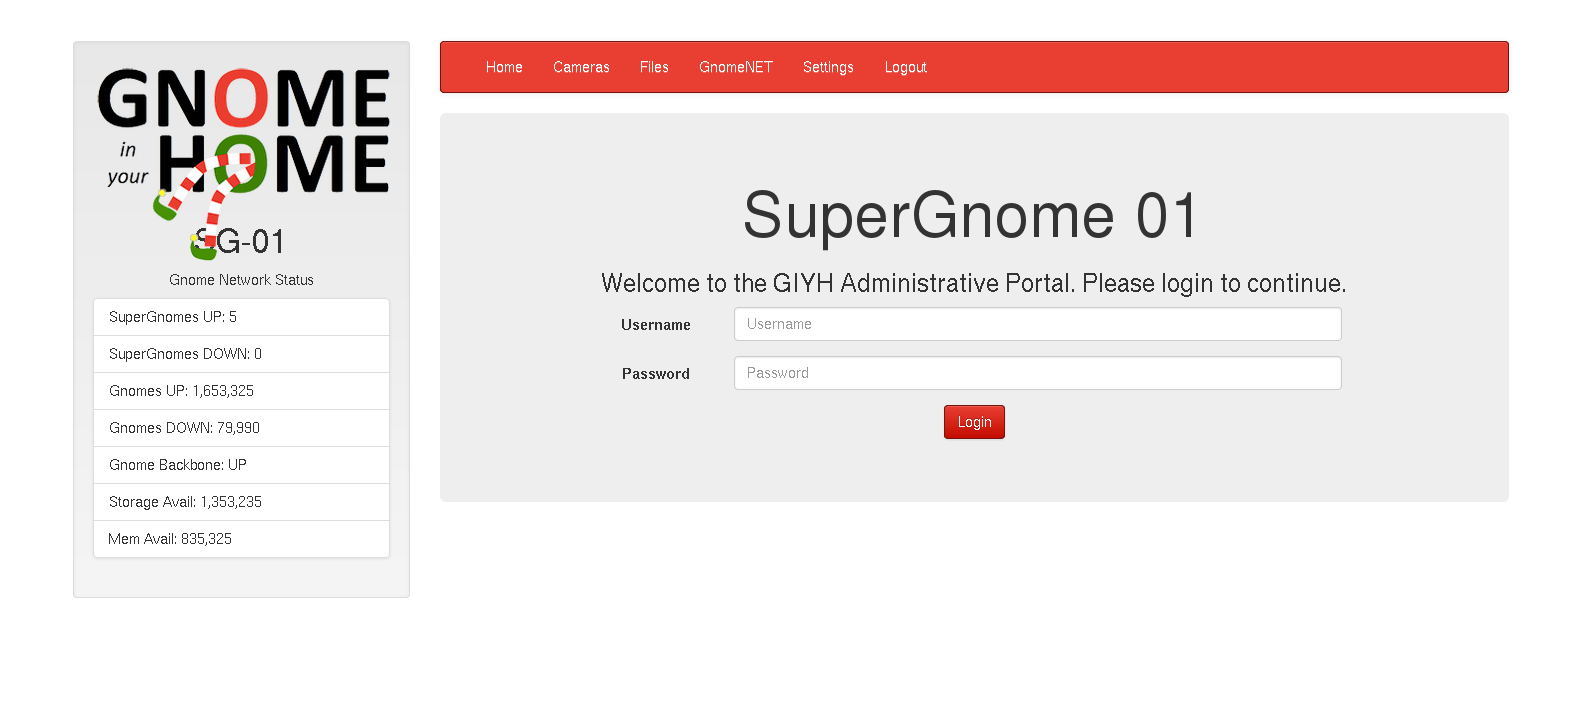 The SuperGnome web interface